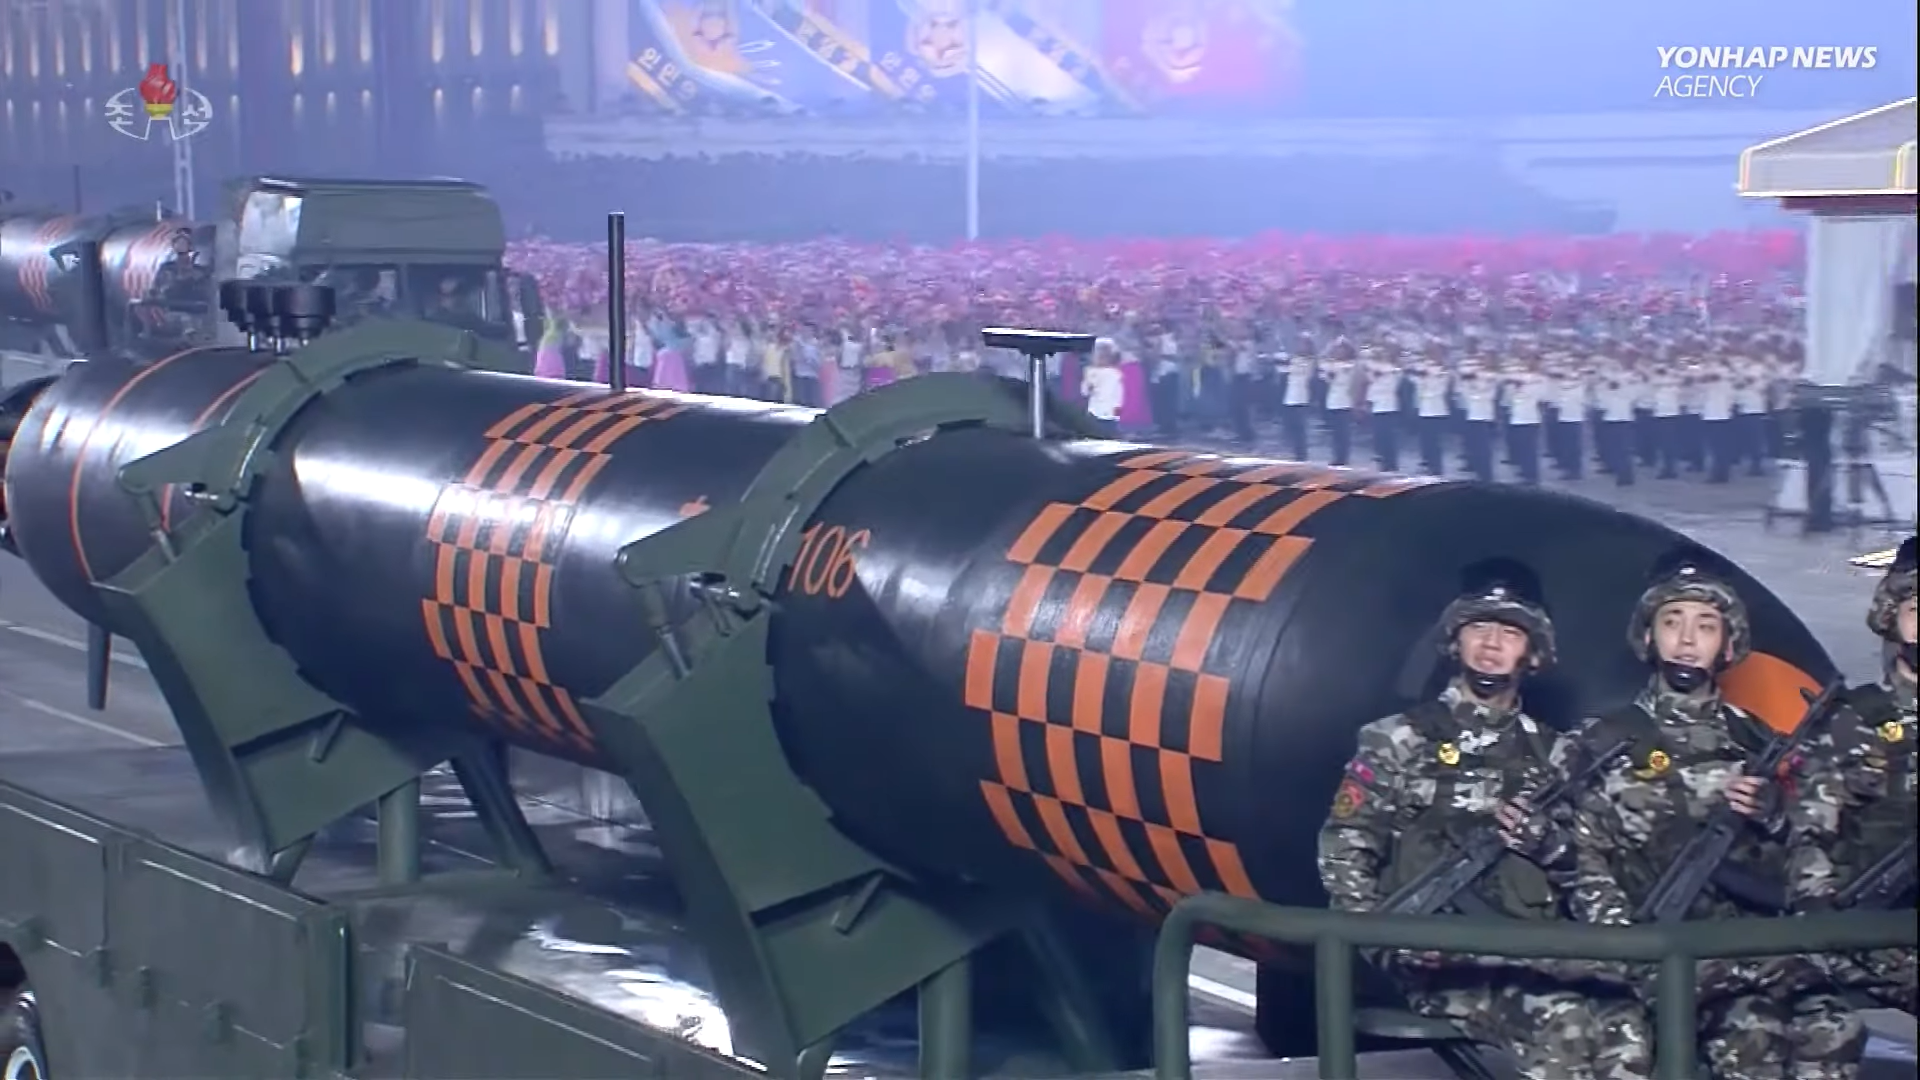 Figure 2. Underwater nuclear attack drones at the 27 July parade. As the DPRK navy is not known to have super-large torpedo tubes, it is possible that this drone is either directly launched from shore or released by surface vessels. Image: KCTV/Yonhap